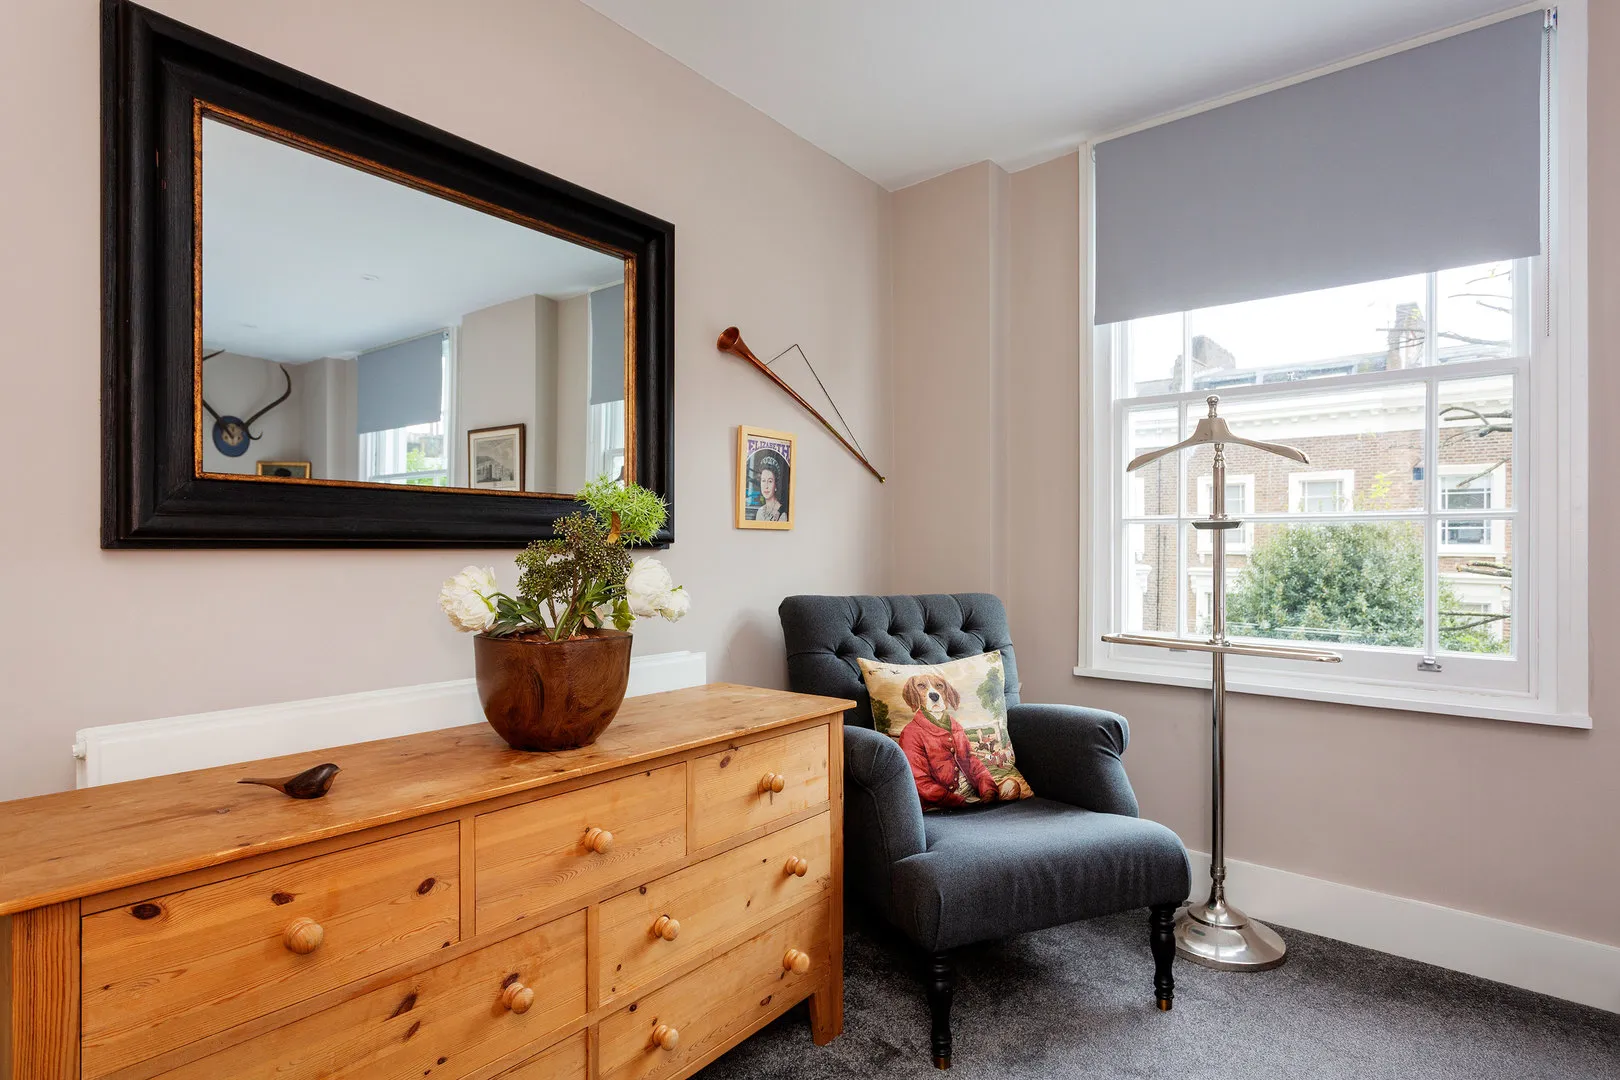 Artesian Road, holiday home in Notting Hill, London